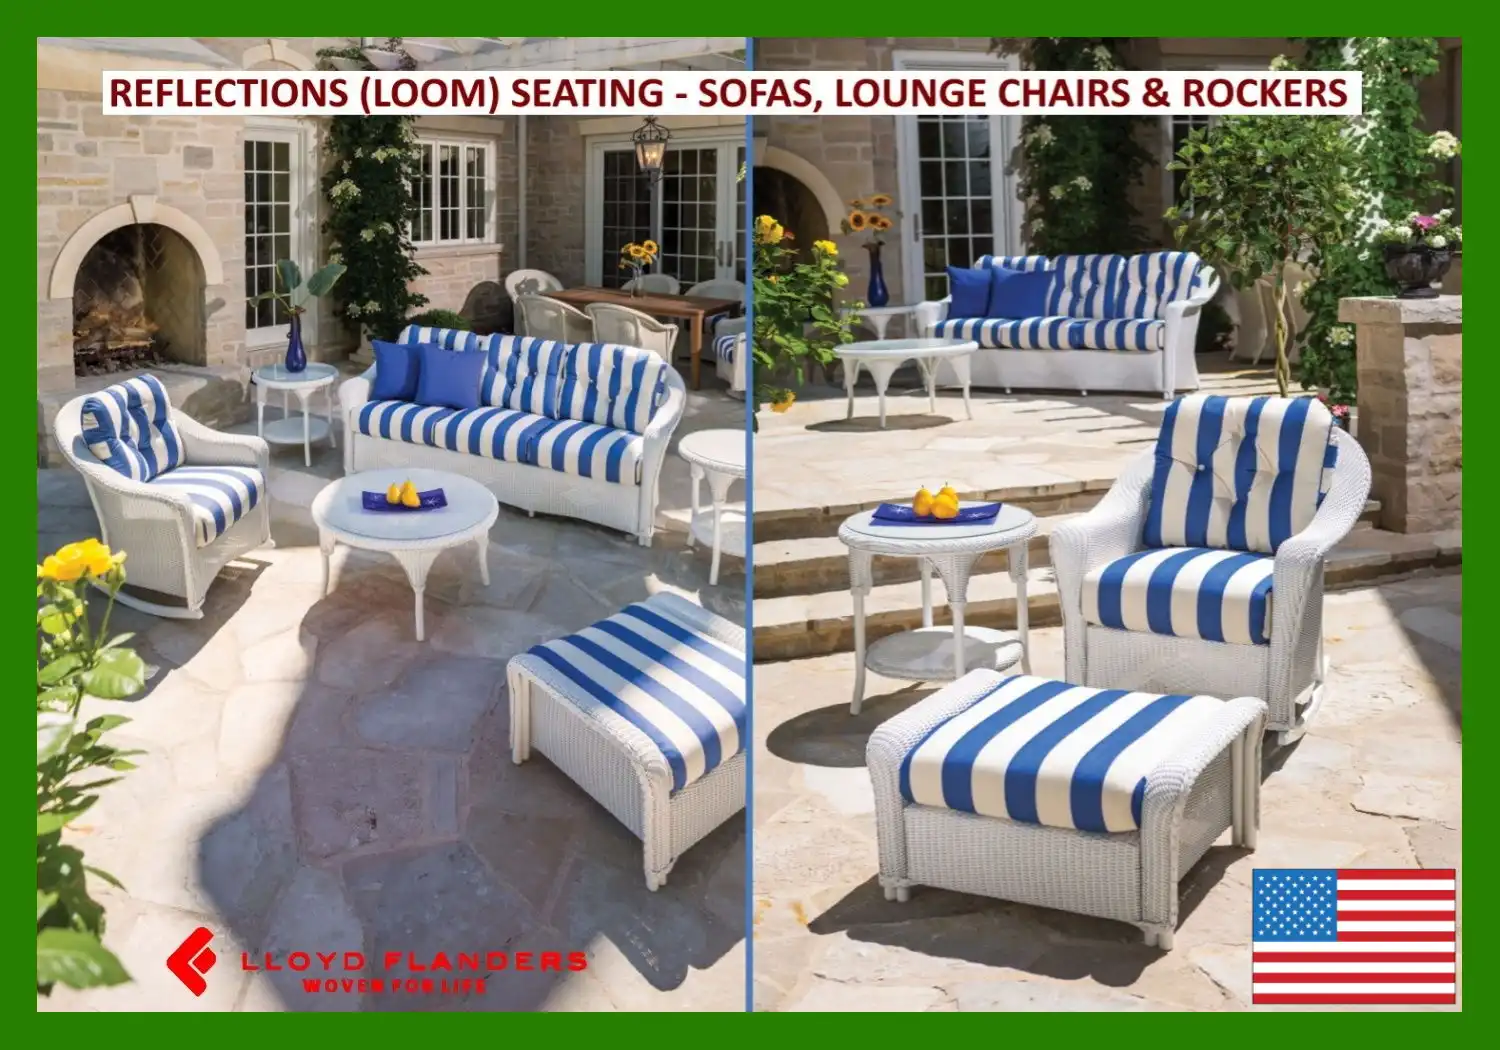 REFLECTIONS (LOOM) SEATING - SOFAS, LOUNGE CHAIRS & ROCKERS